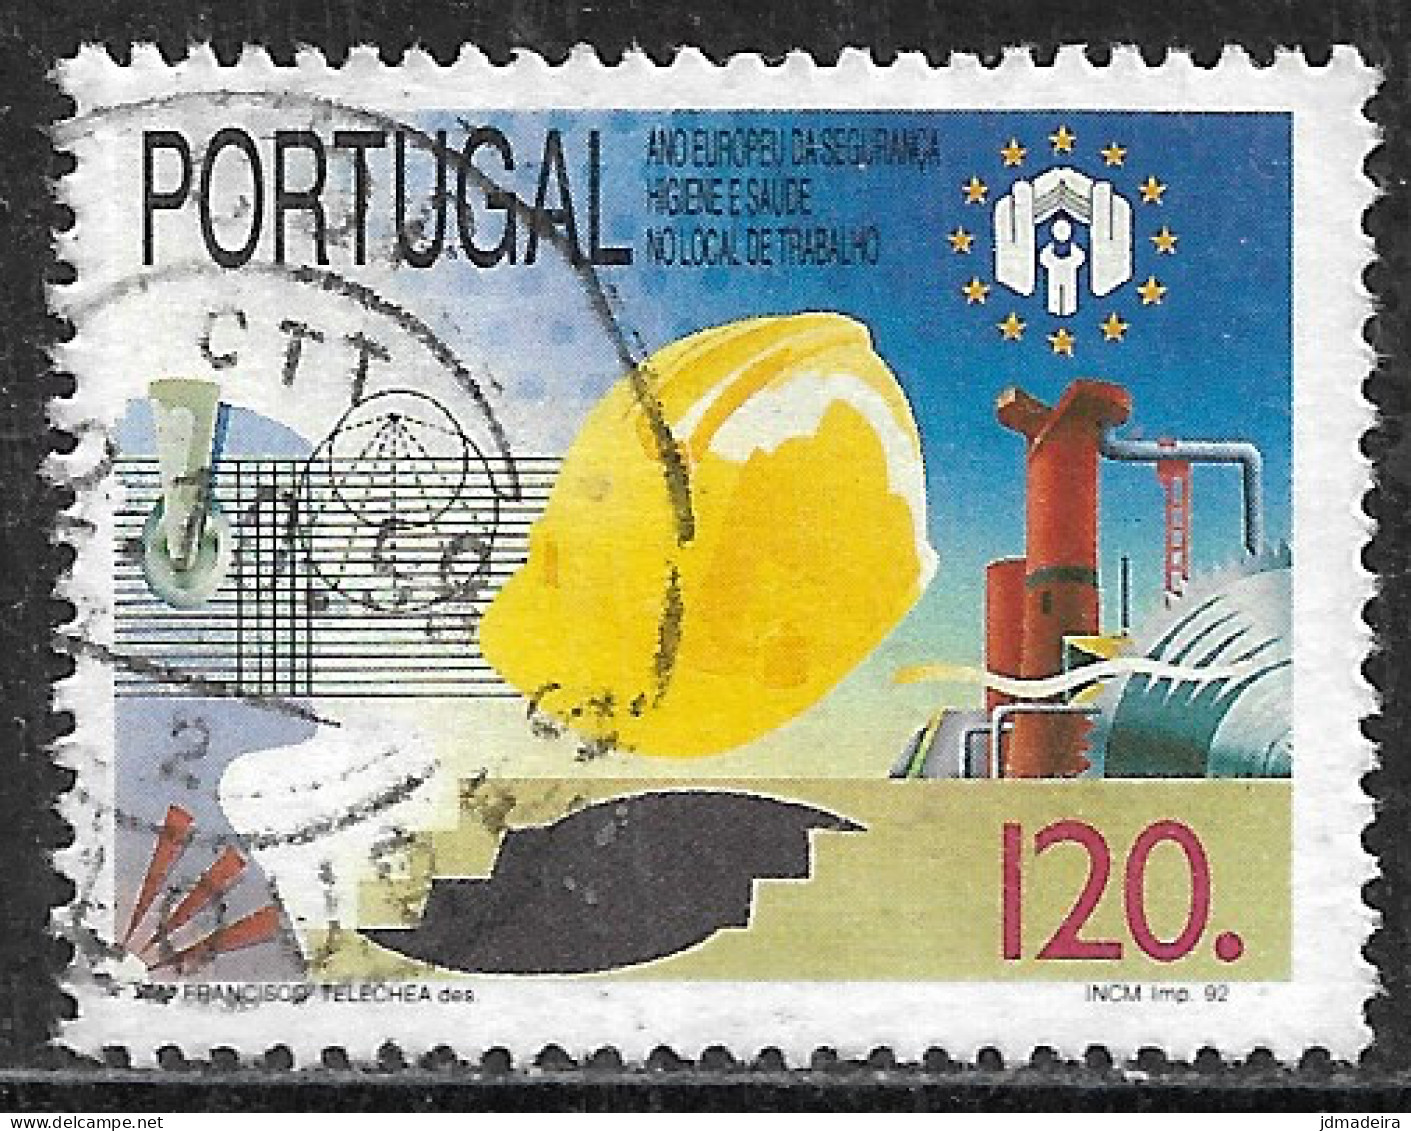 Portugal – 1992 European Year Safety At Work 120. Used Stamp - Usati